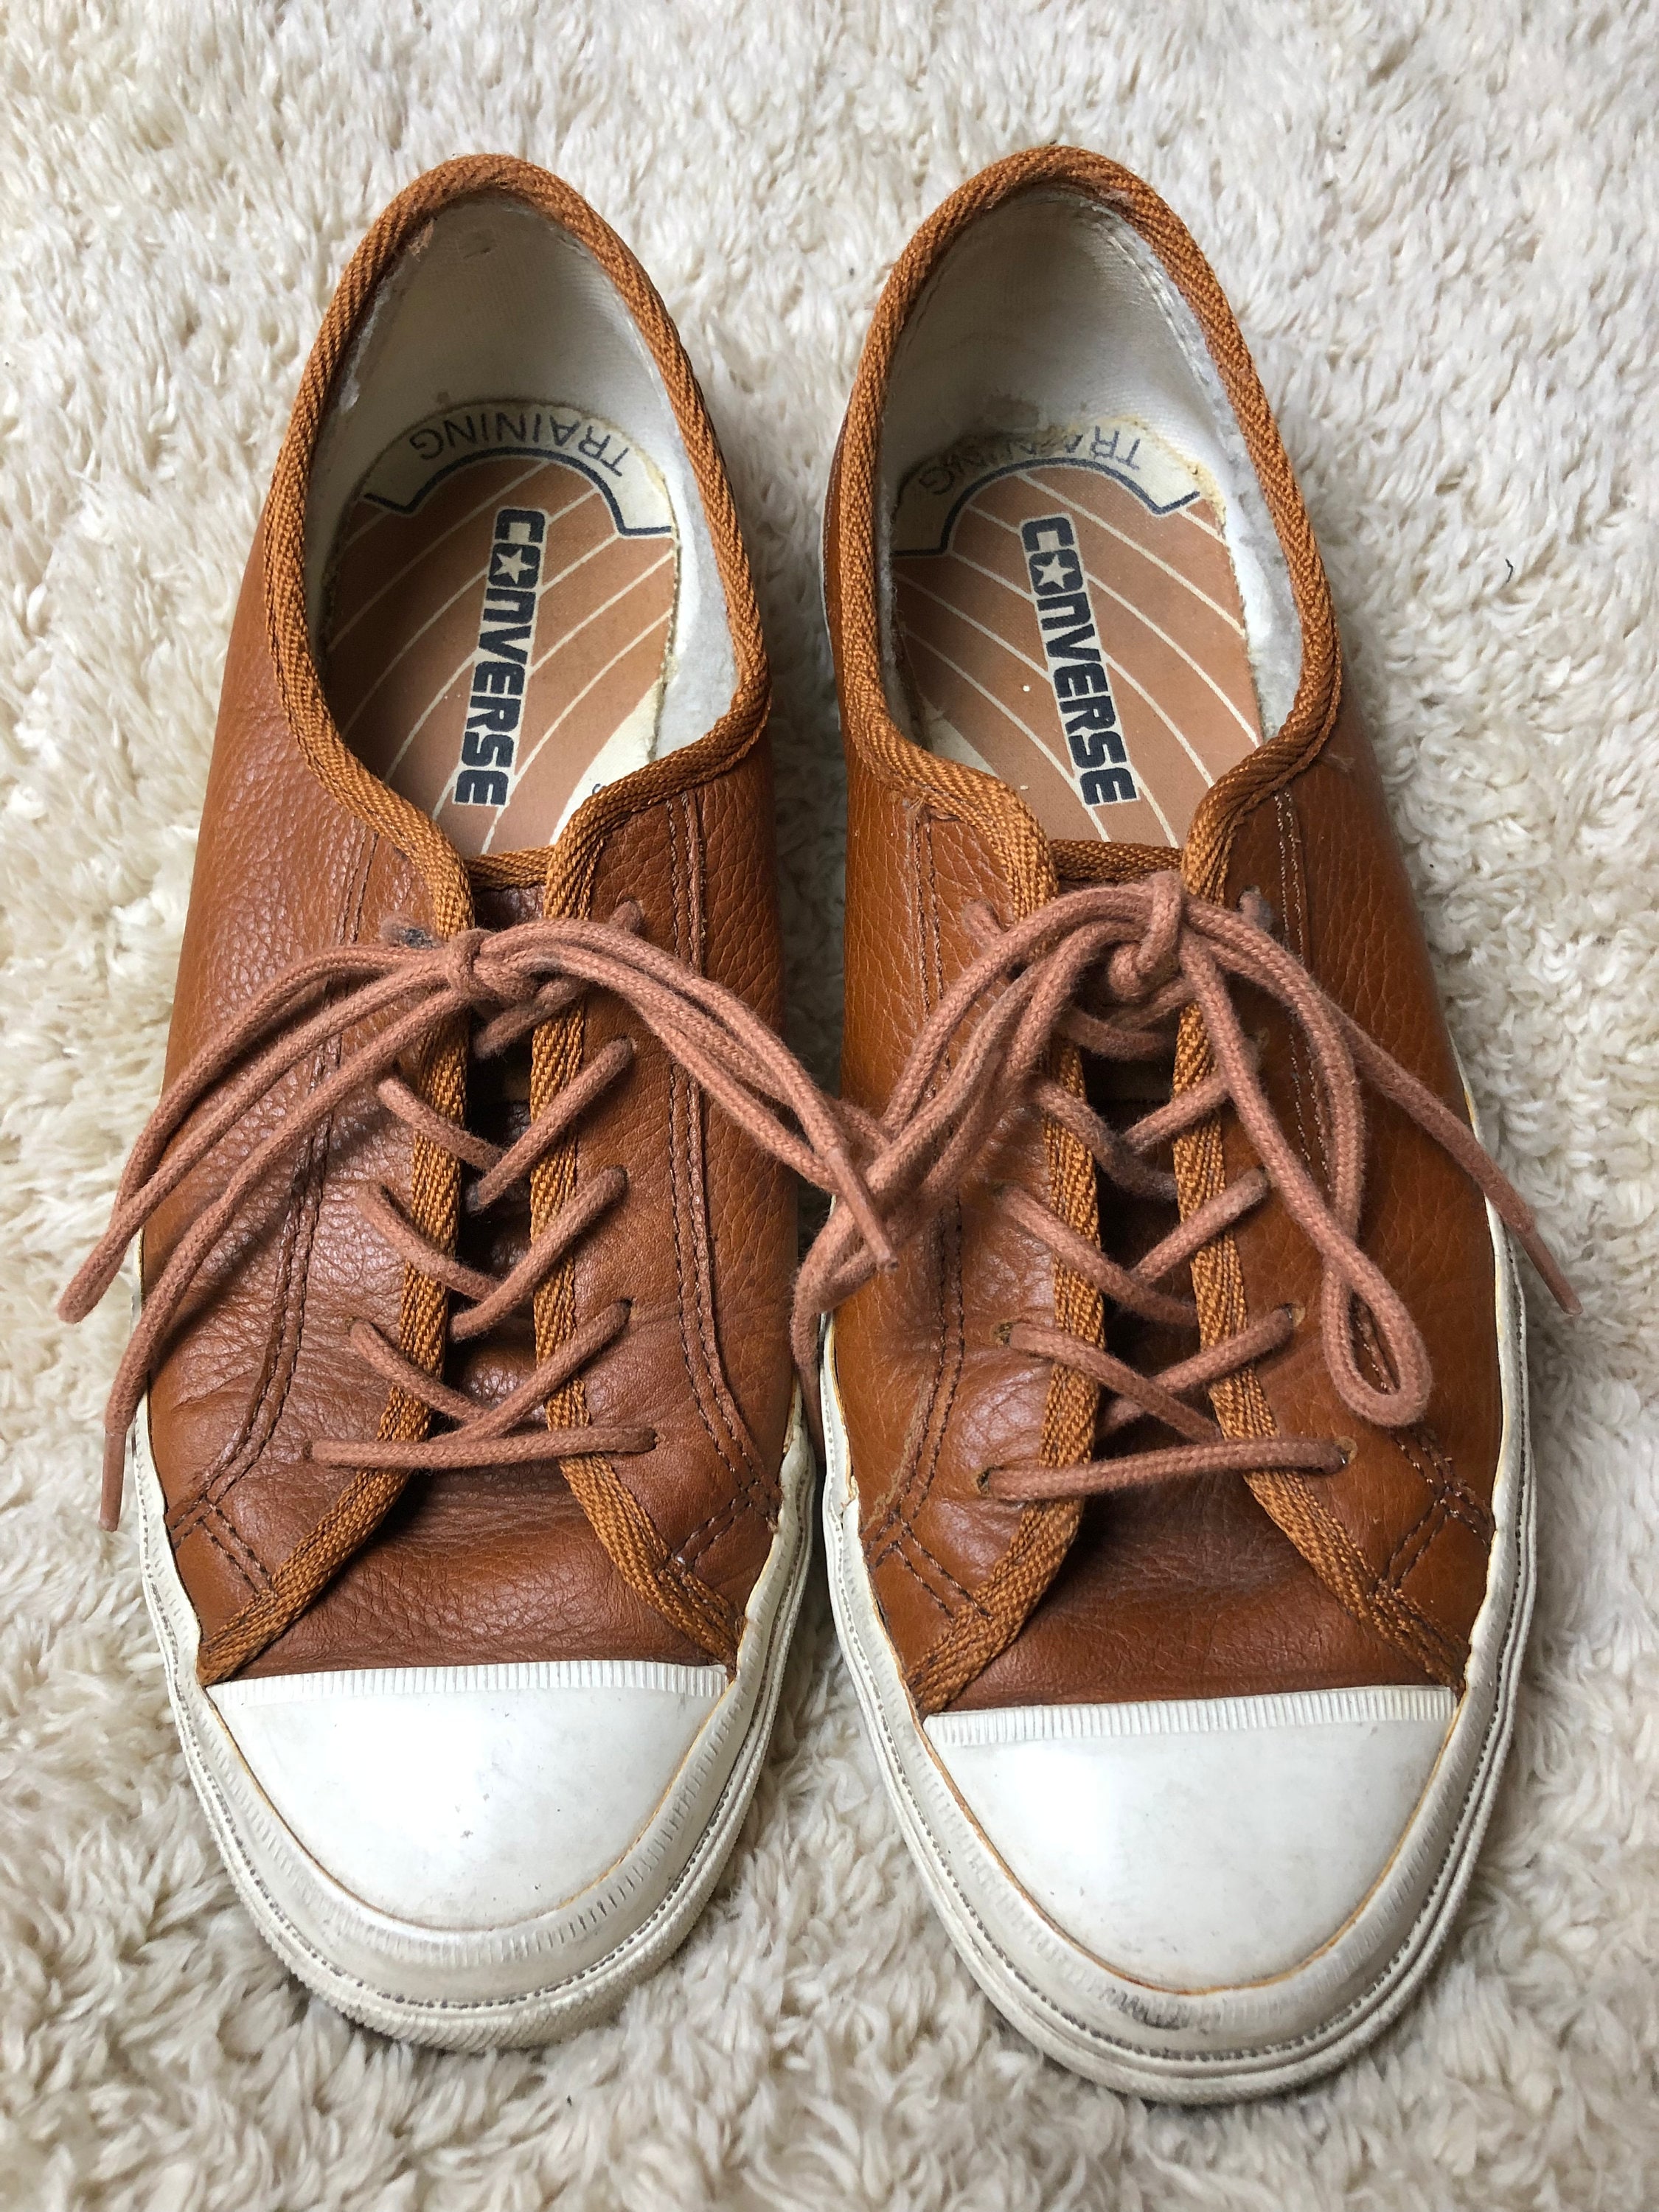 Vintage Converse Leather Sneakers Shoes - Etsy Canada